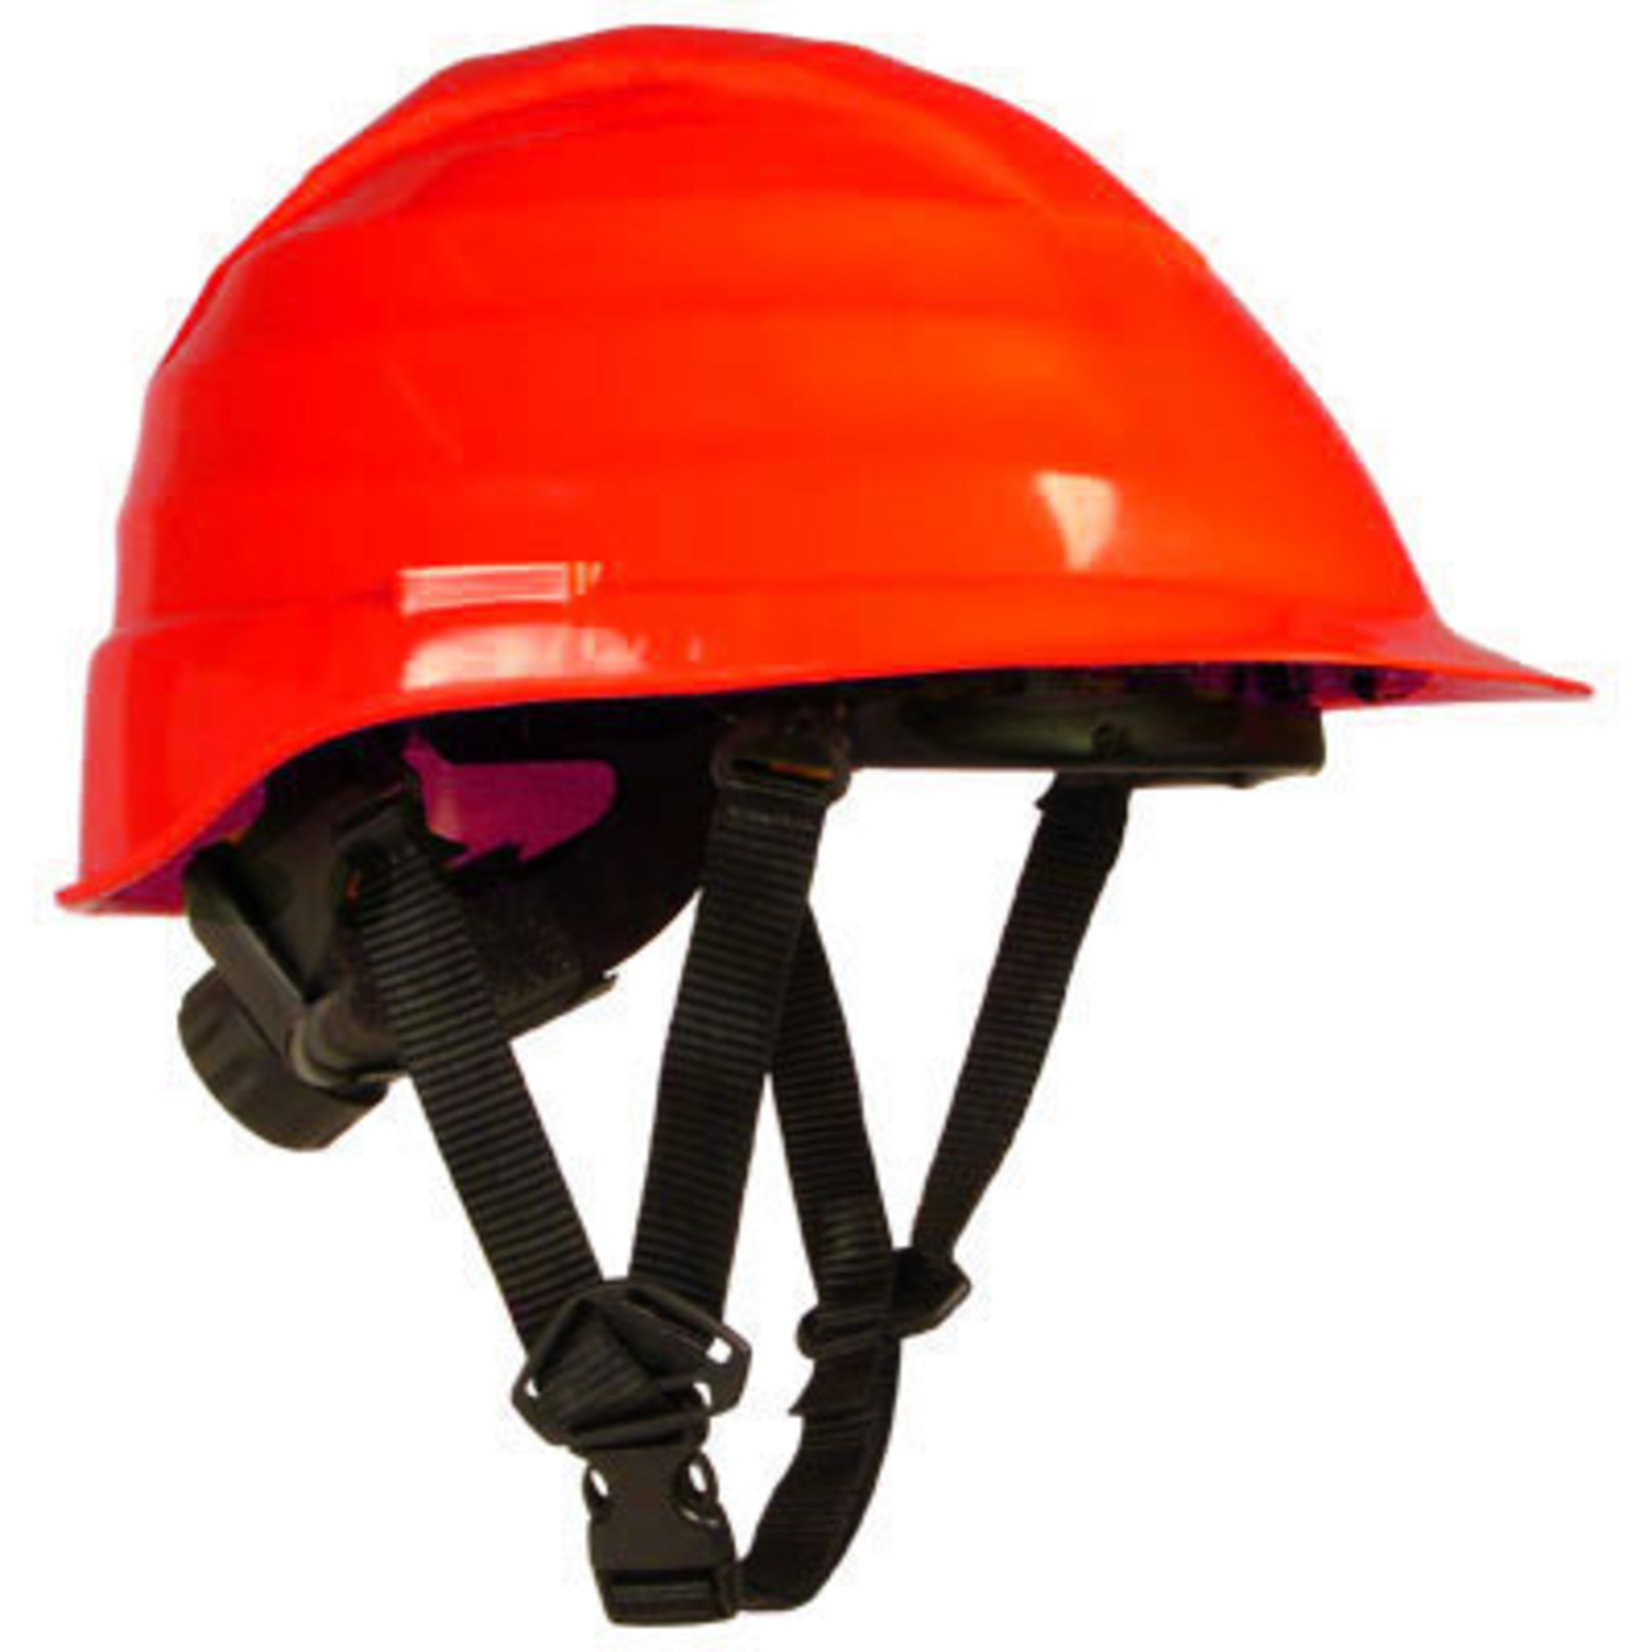 Rockman Rockman Dielectric Arborist Helmet In Red with 4 Point Chinstrap